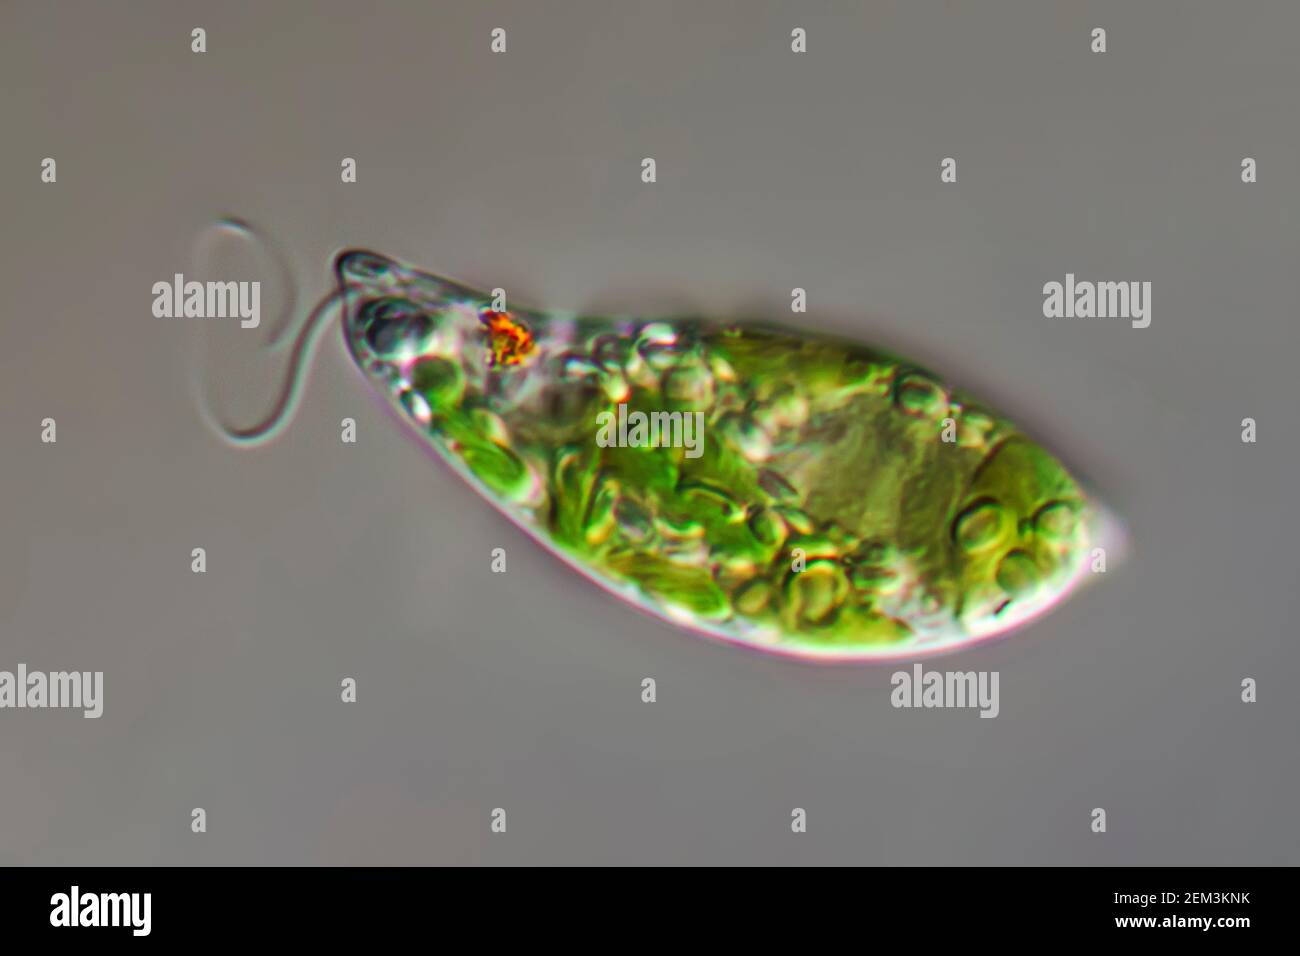 euglenoid flagellate (Euglena gracilis), Differential interference contrast  microscope image, magnification: x250 related to 35 mm, Germany Stock Photo  - Alamy